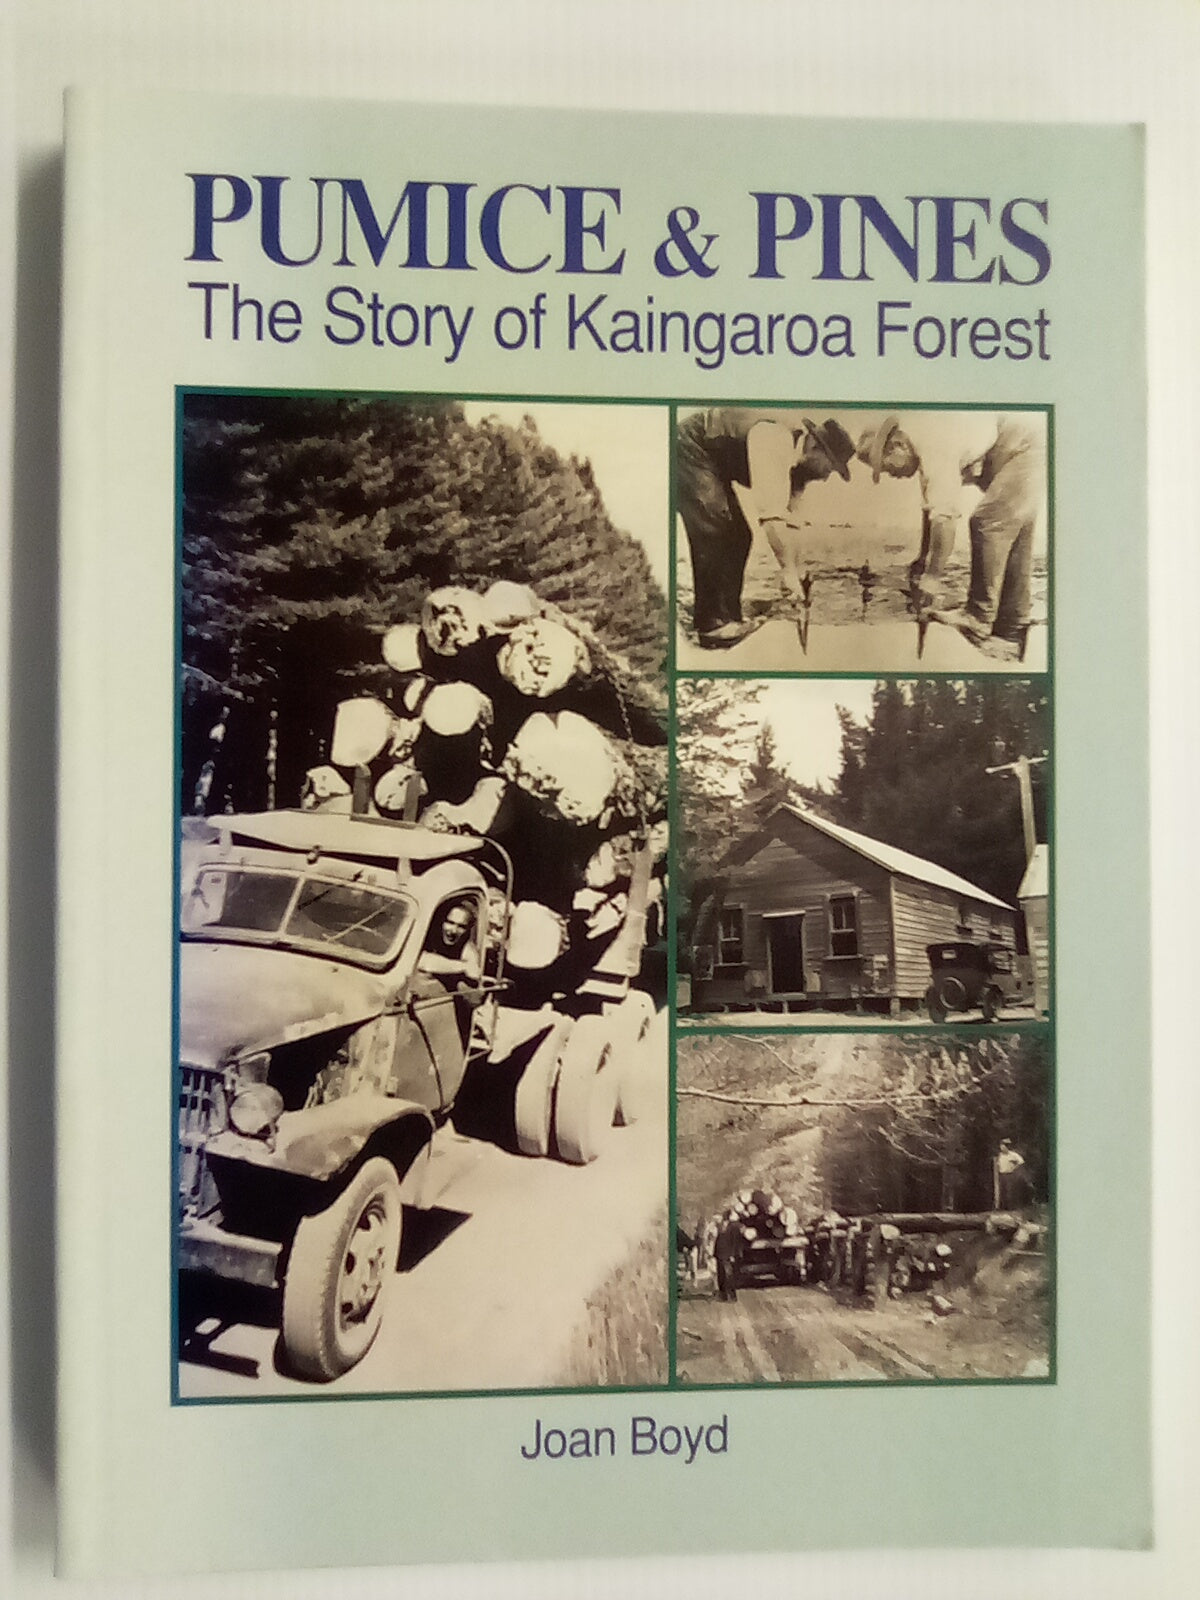 Pumice & Pines - The Story of Kaingaroa Forest by Joan Boyd